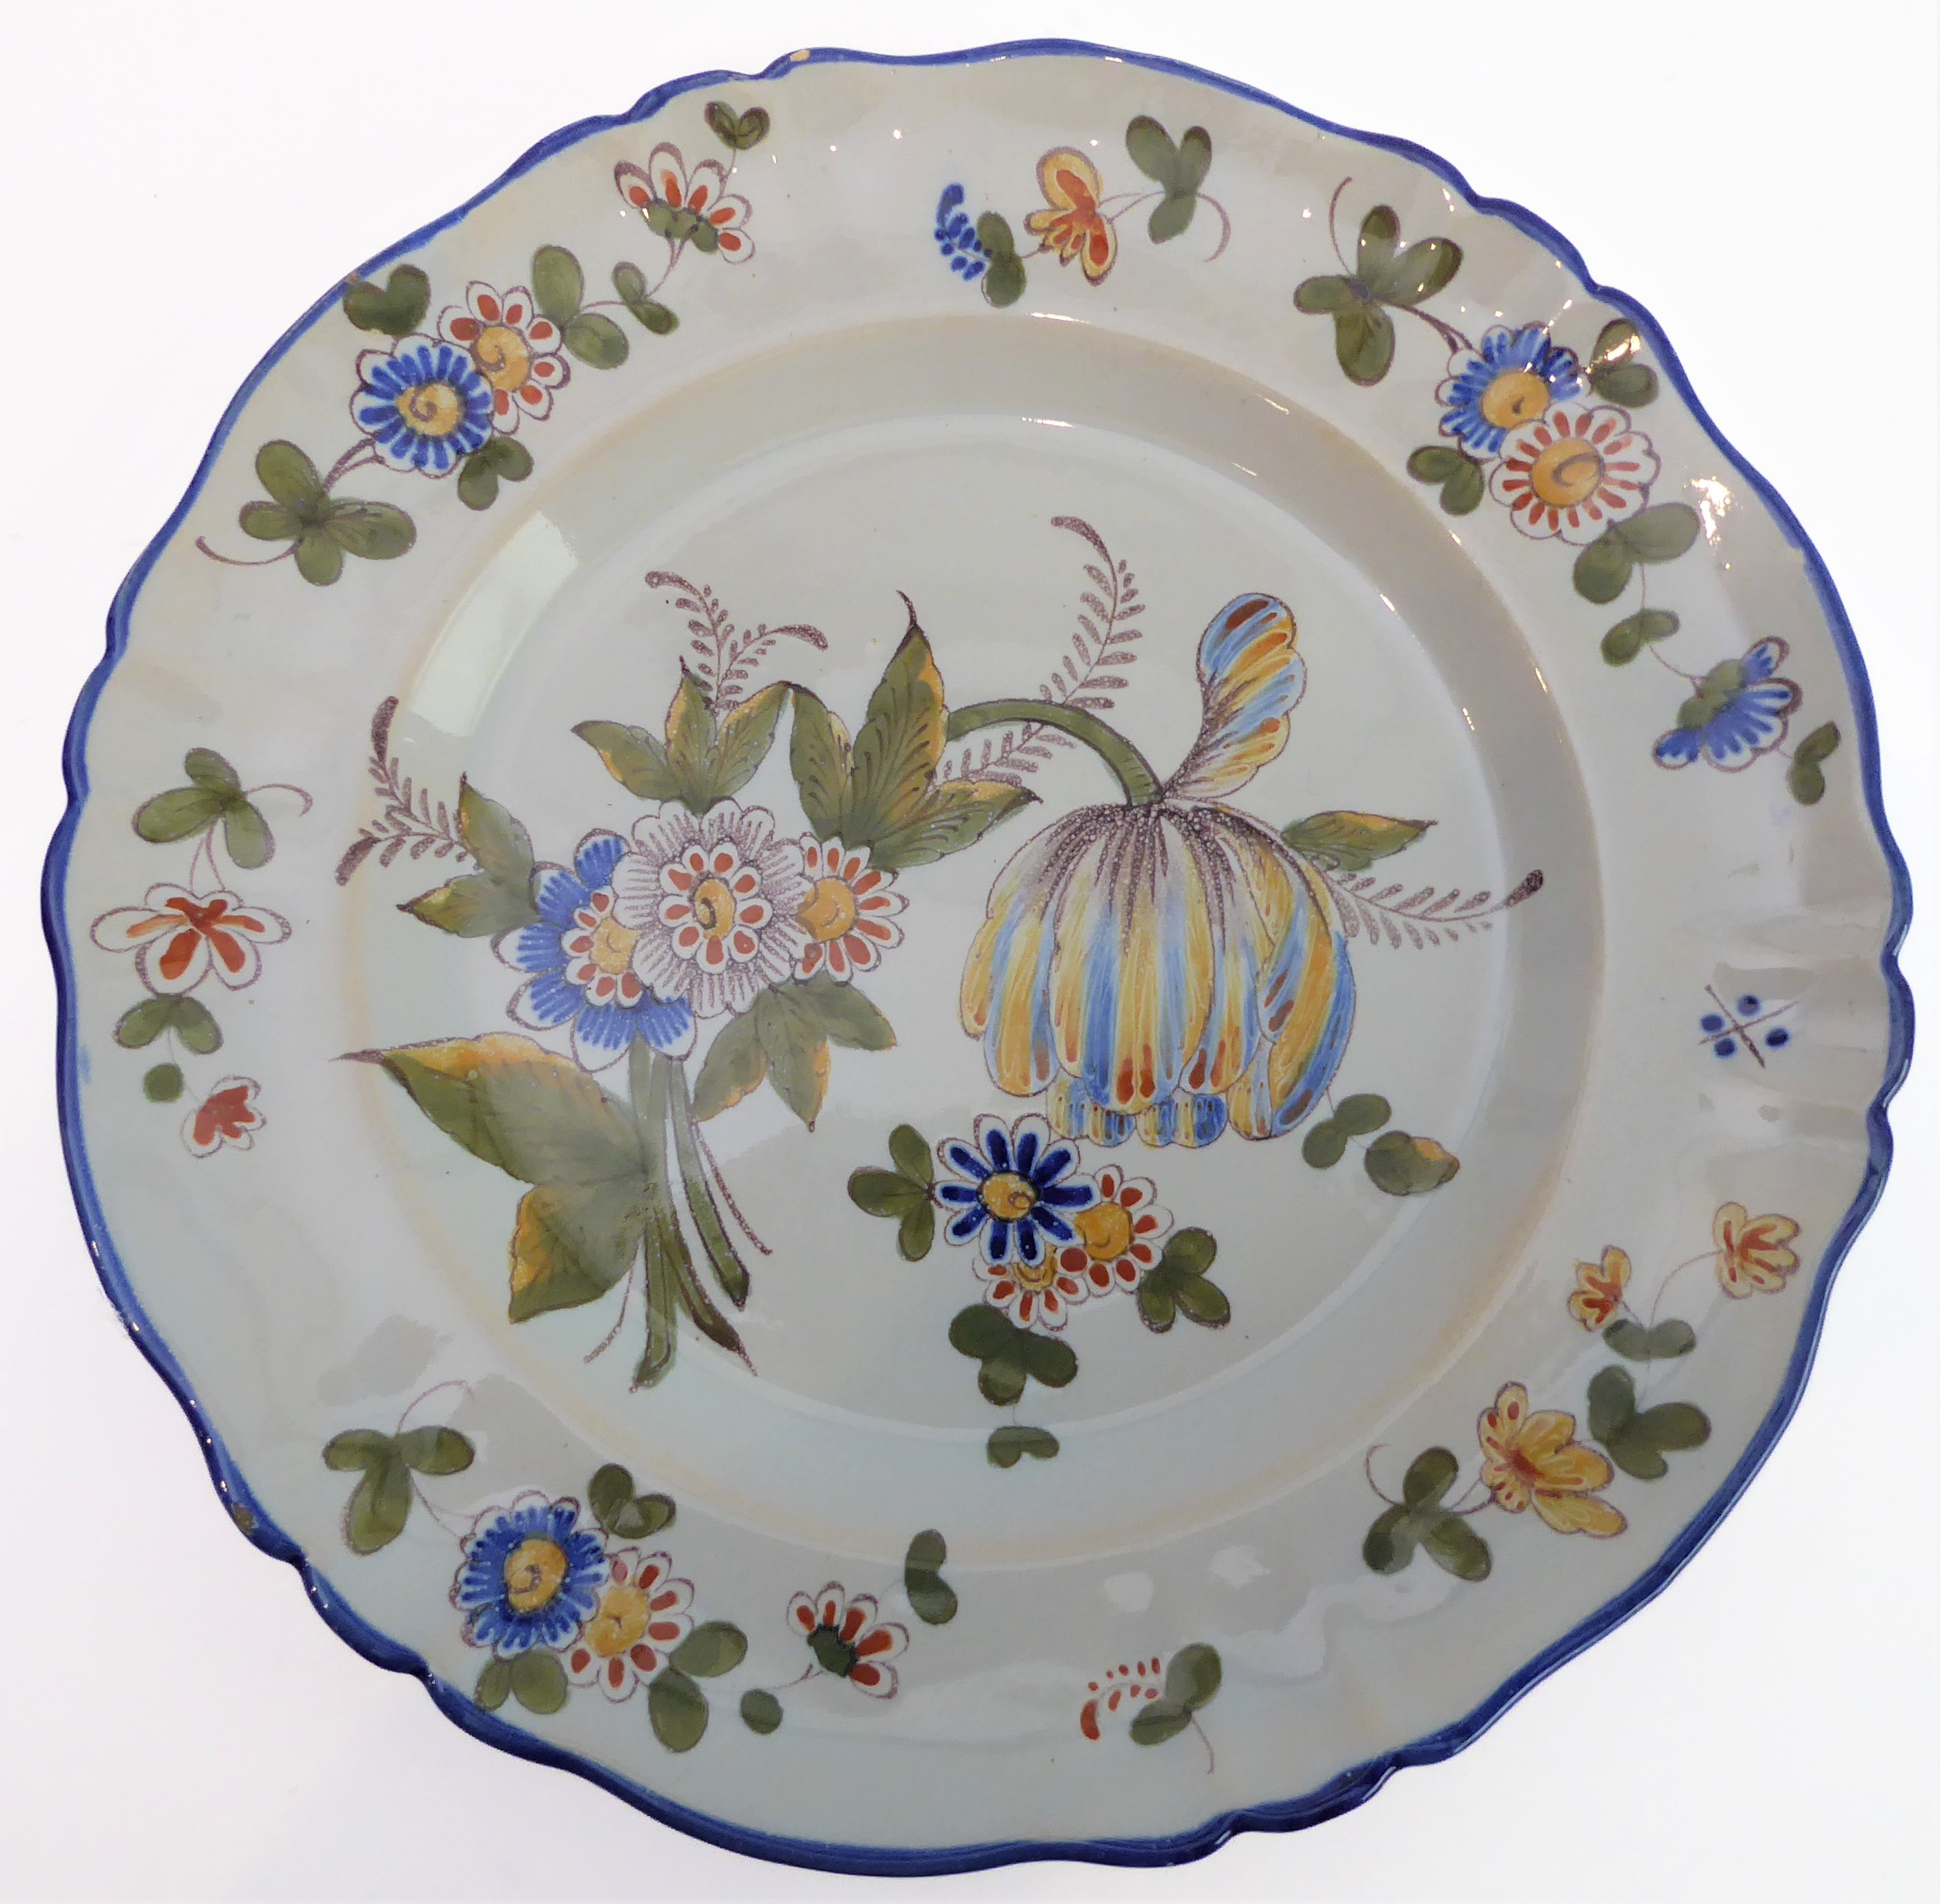 A set of eleven 19th century faience plates by Keller & Guerin at Luneville (early marks). (The - Image 12 of 17